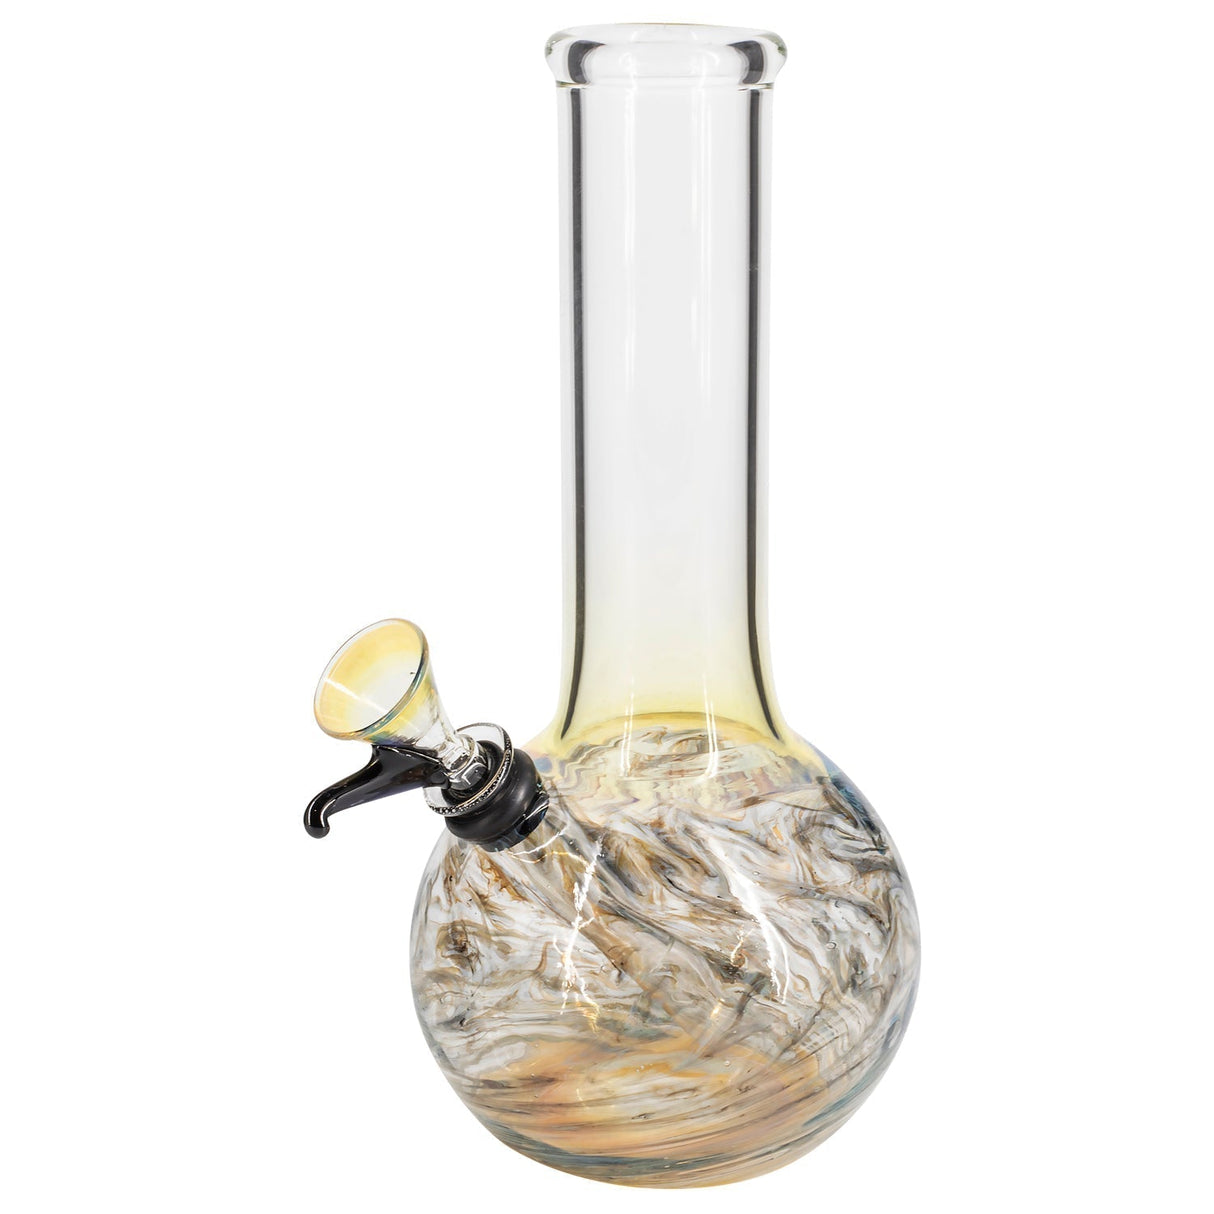 LA Pipes "Jupiter" Bubble Base Bong with Grommet Joint, Front View on White Background